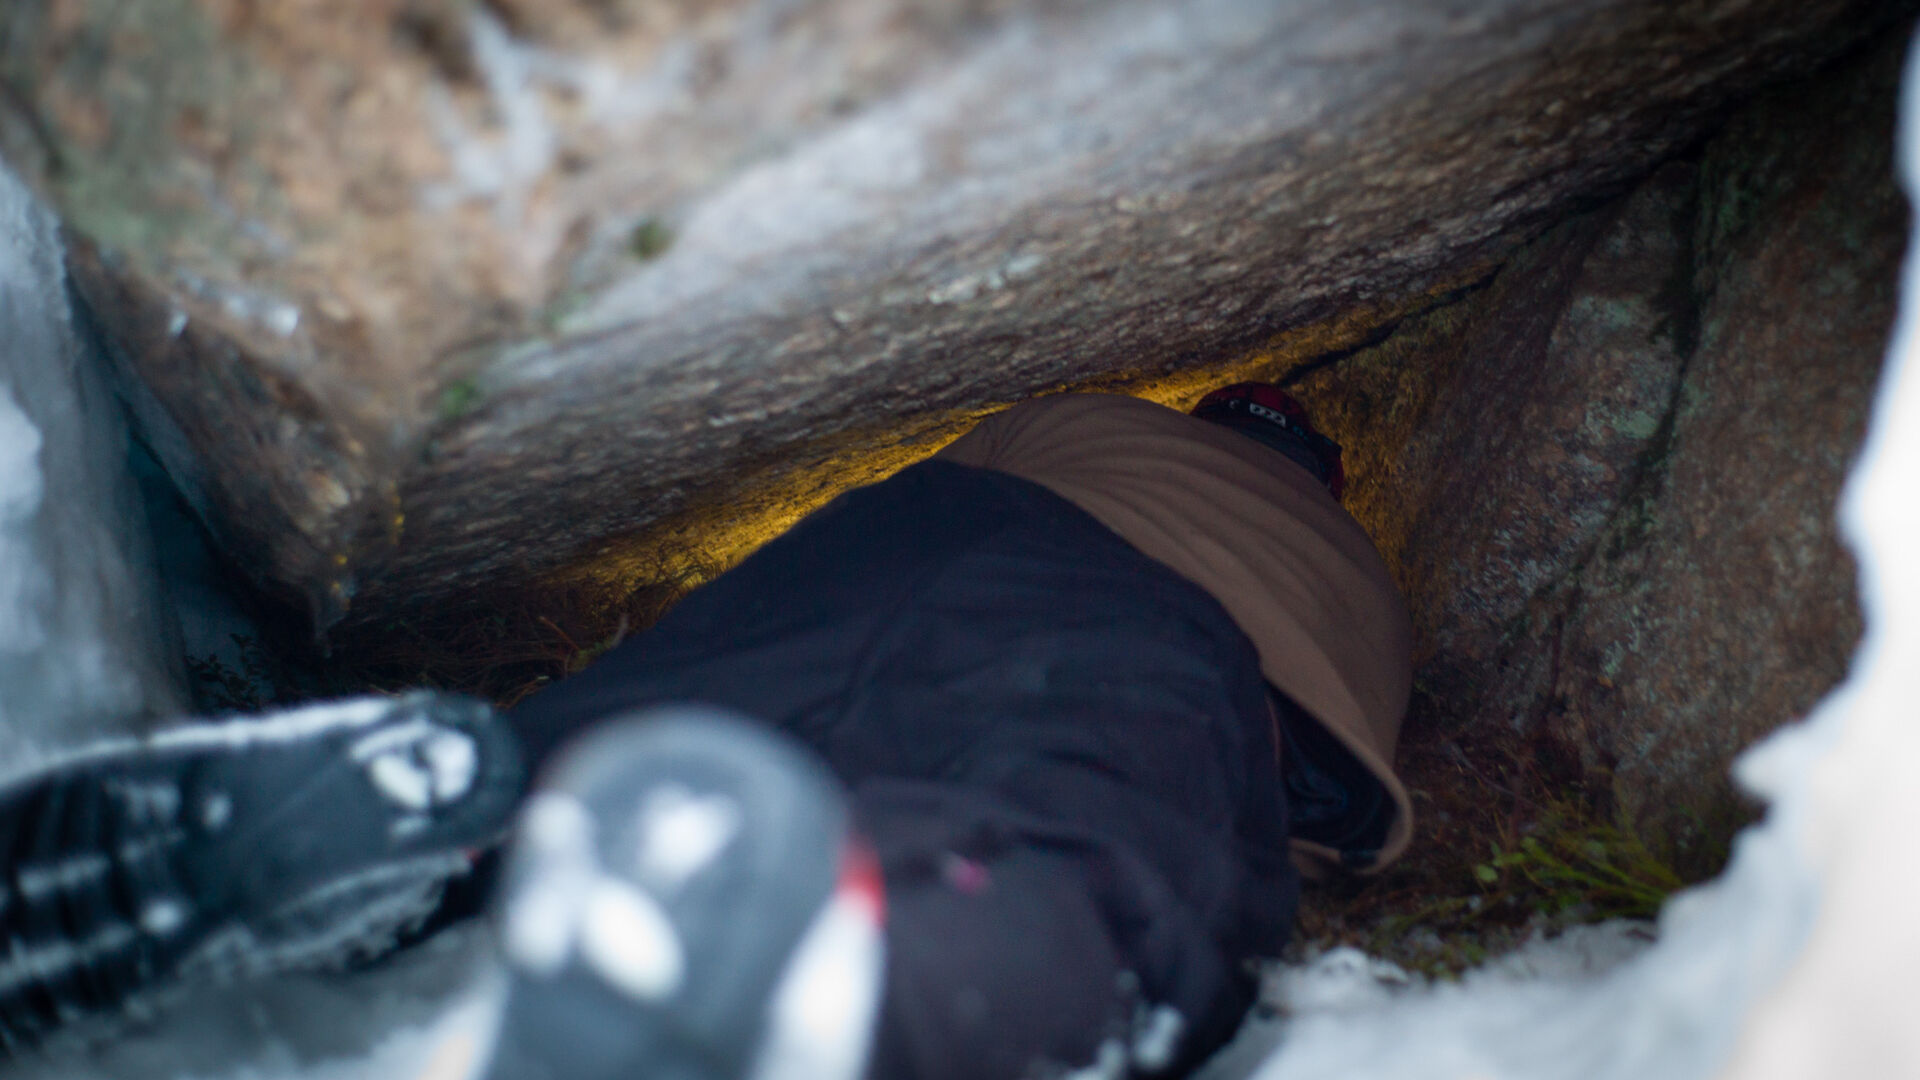 A man's legs is sticking out of the bear den as he is crawling inside to find a bear.